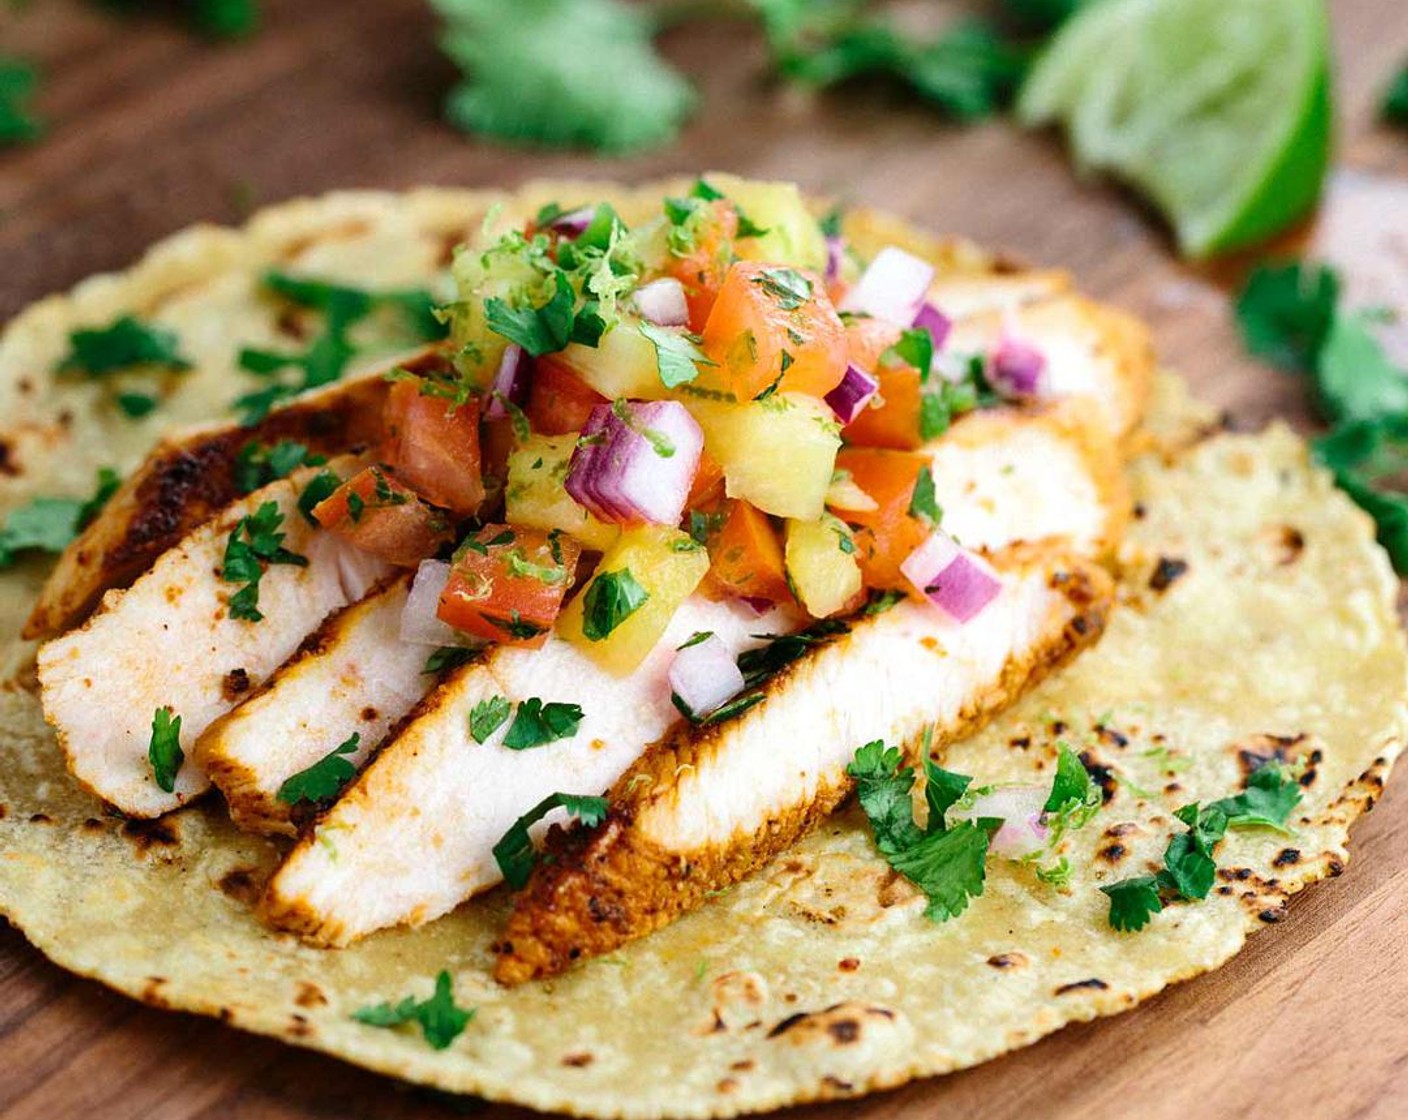 Blackened Chicken Tacos with Pineapple Salsa